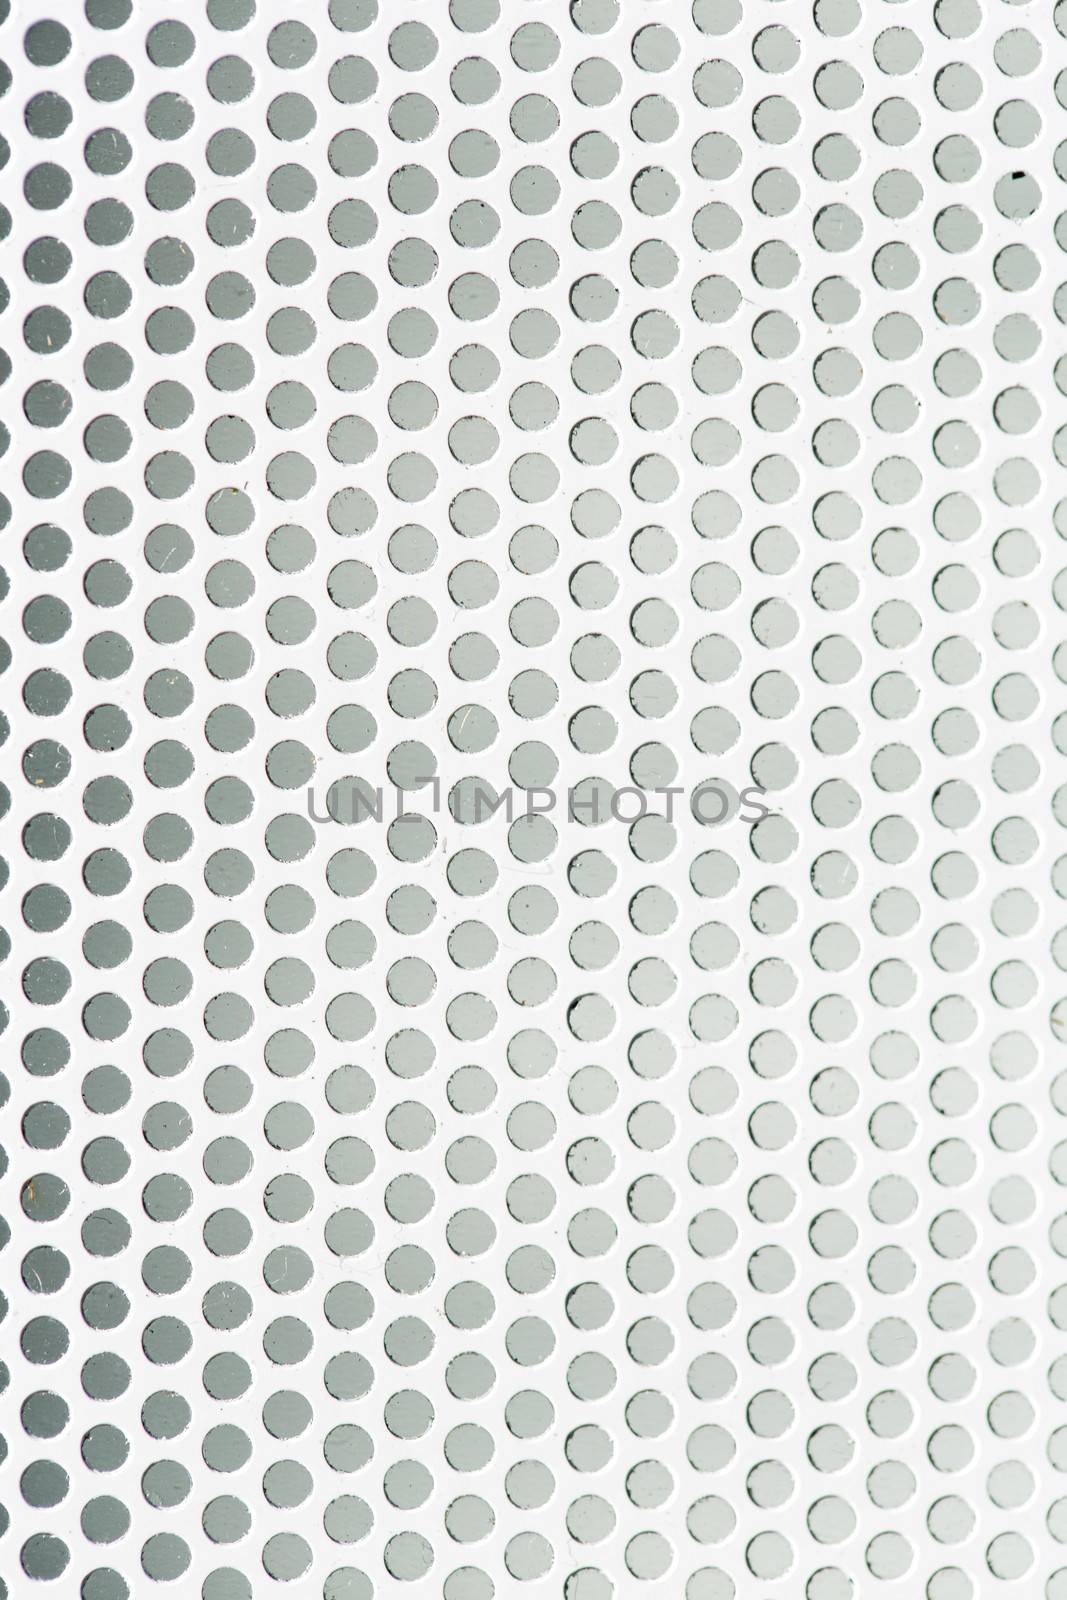 Perforated metal grid texture by stockyimages